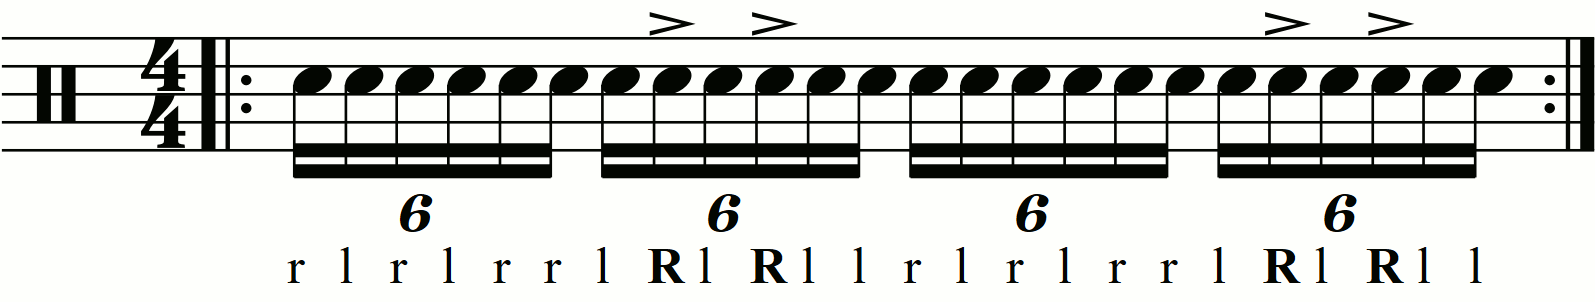 Accenting right hands in a double paradiddle